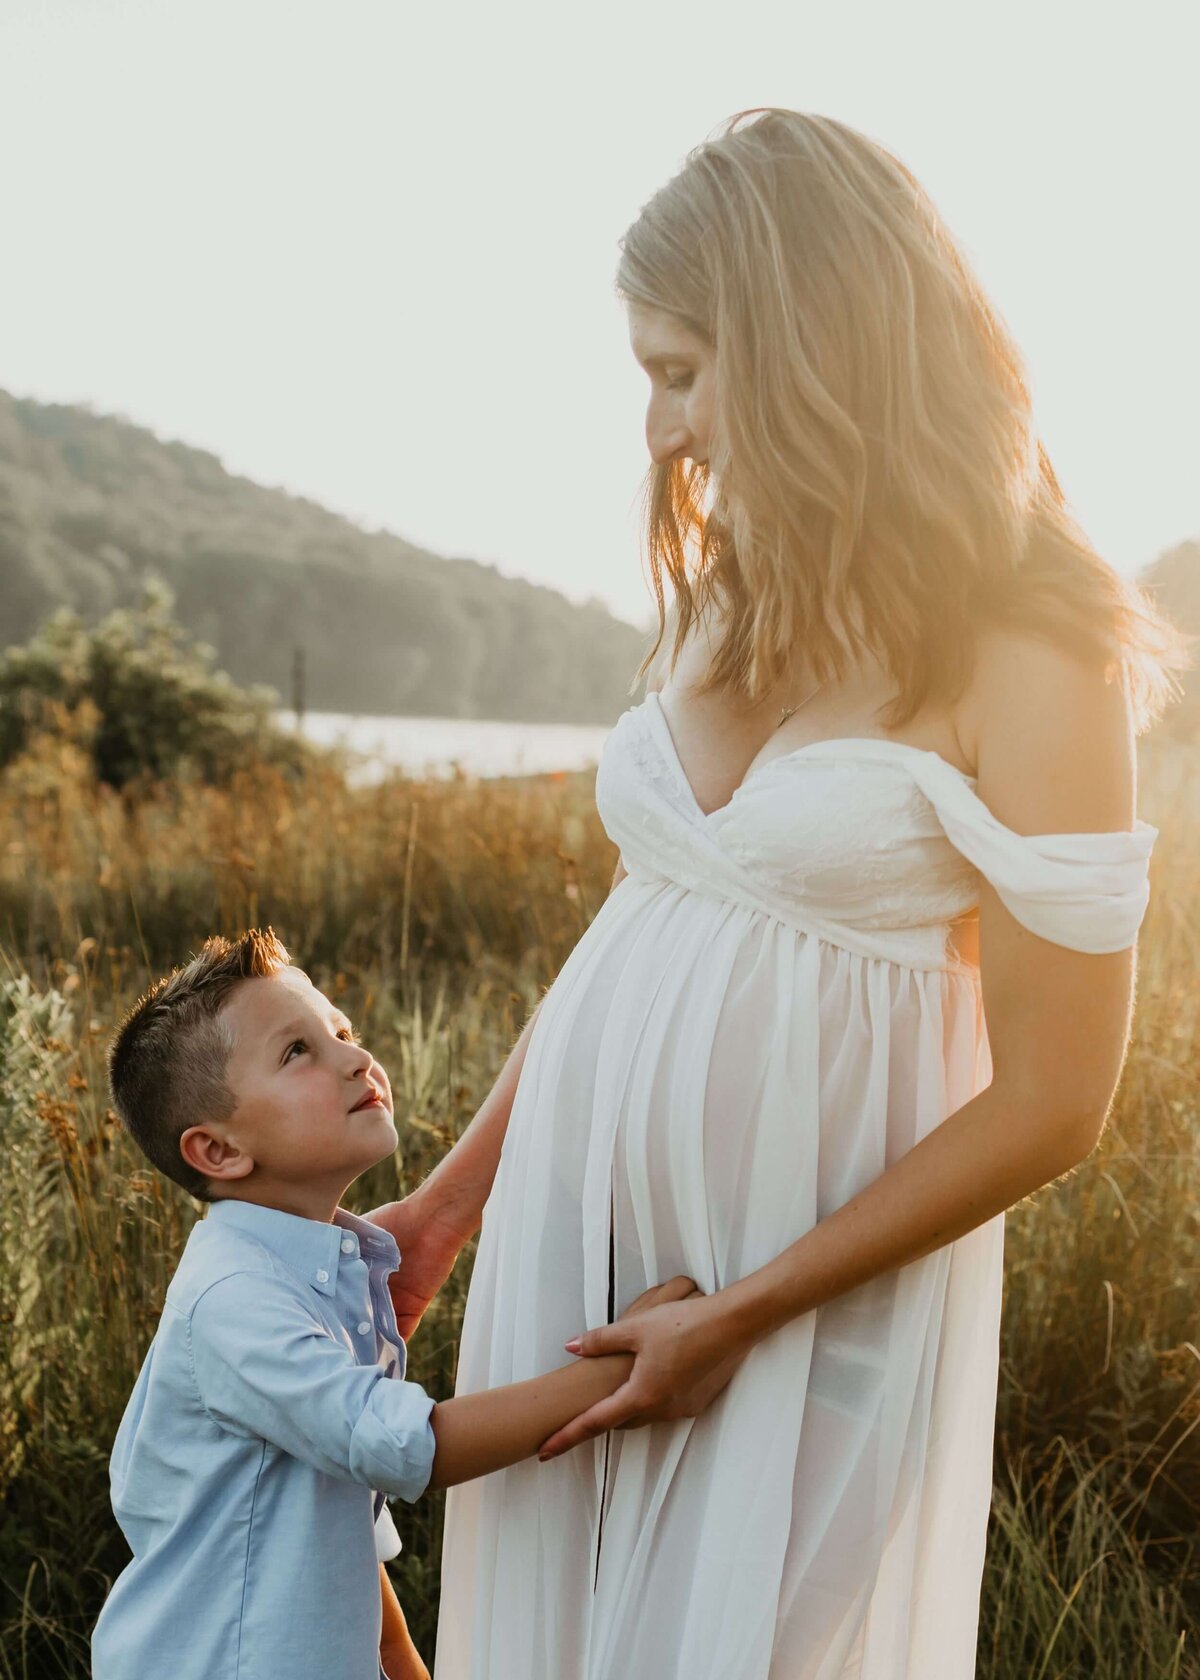 Capture the beauty of a pregnant woman and her son standing in a field at sunset with the expertise of a Pittsburgh maternity photographer.